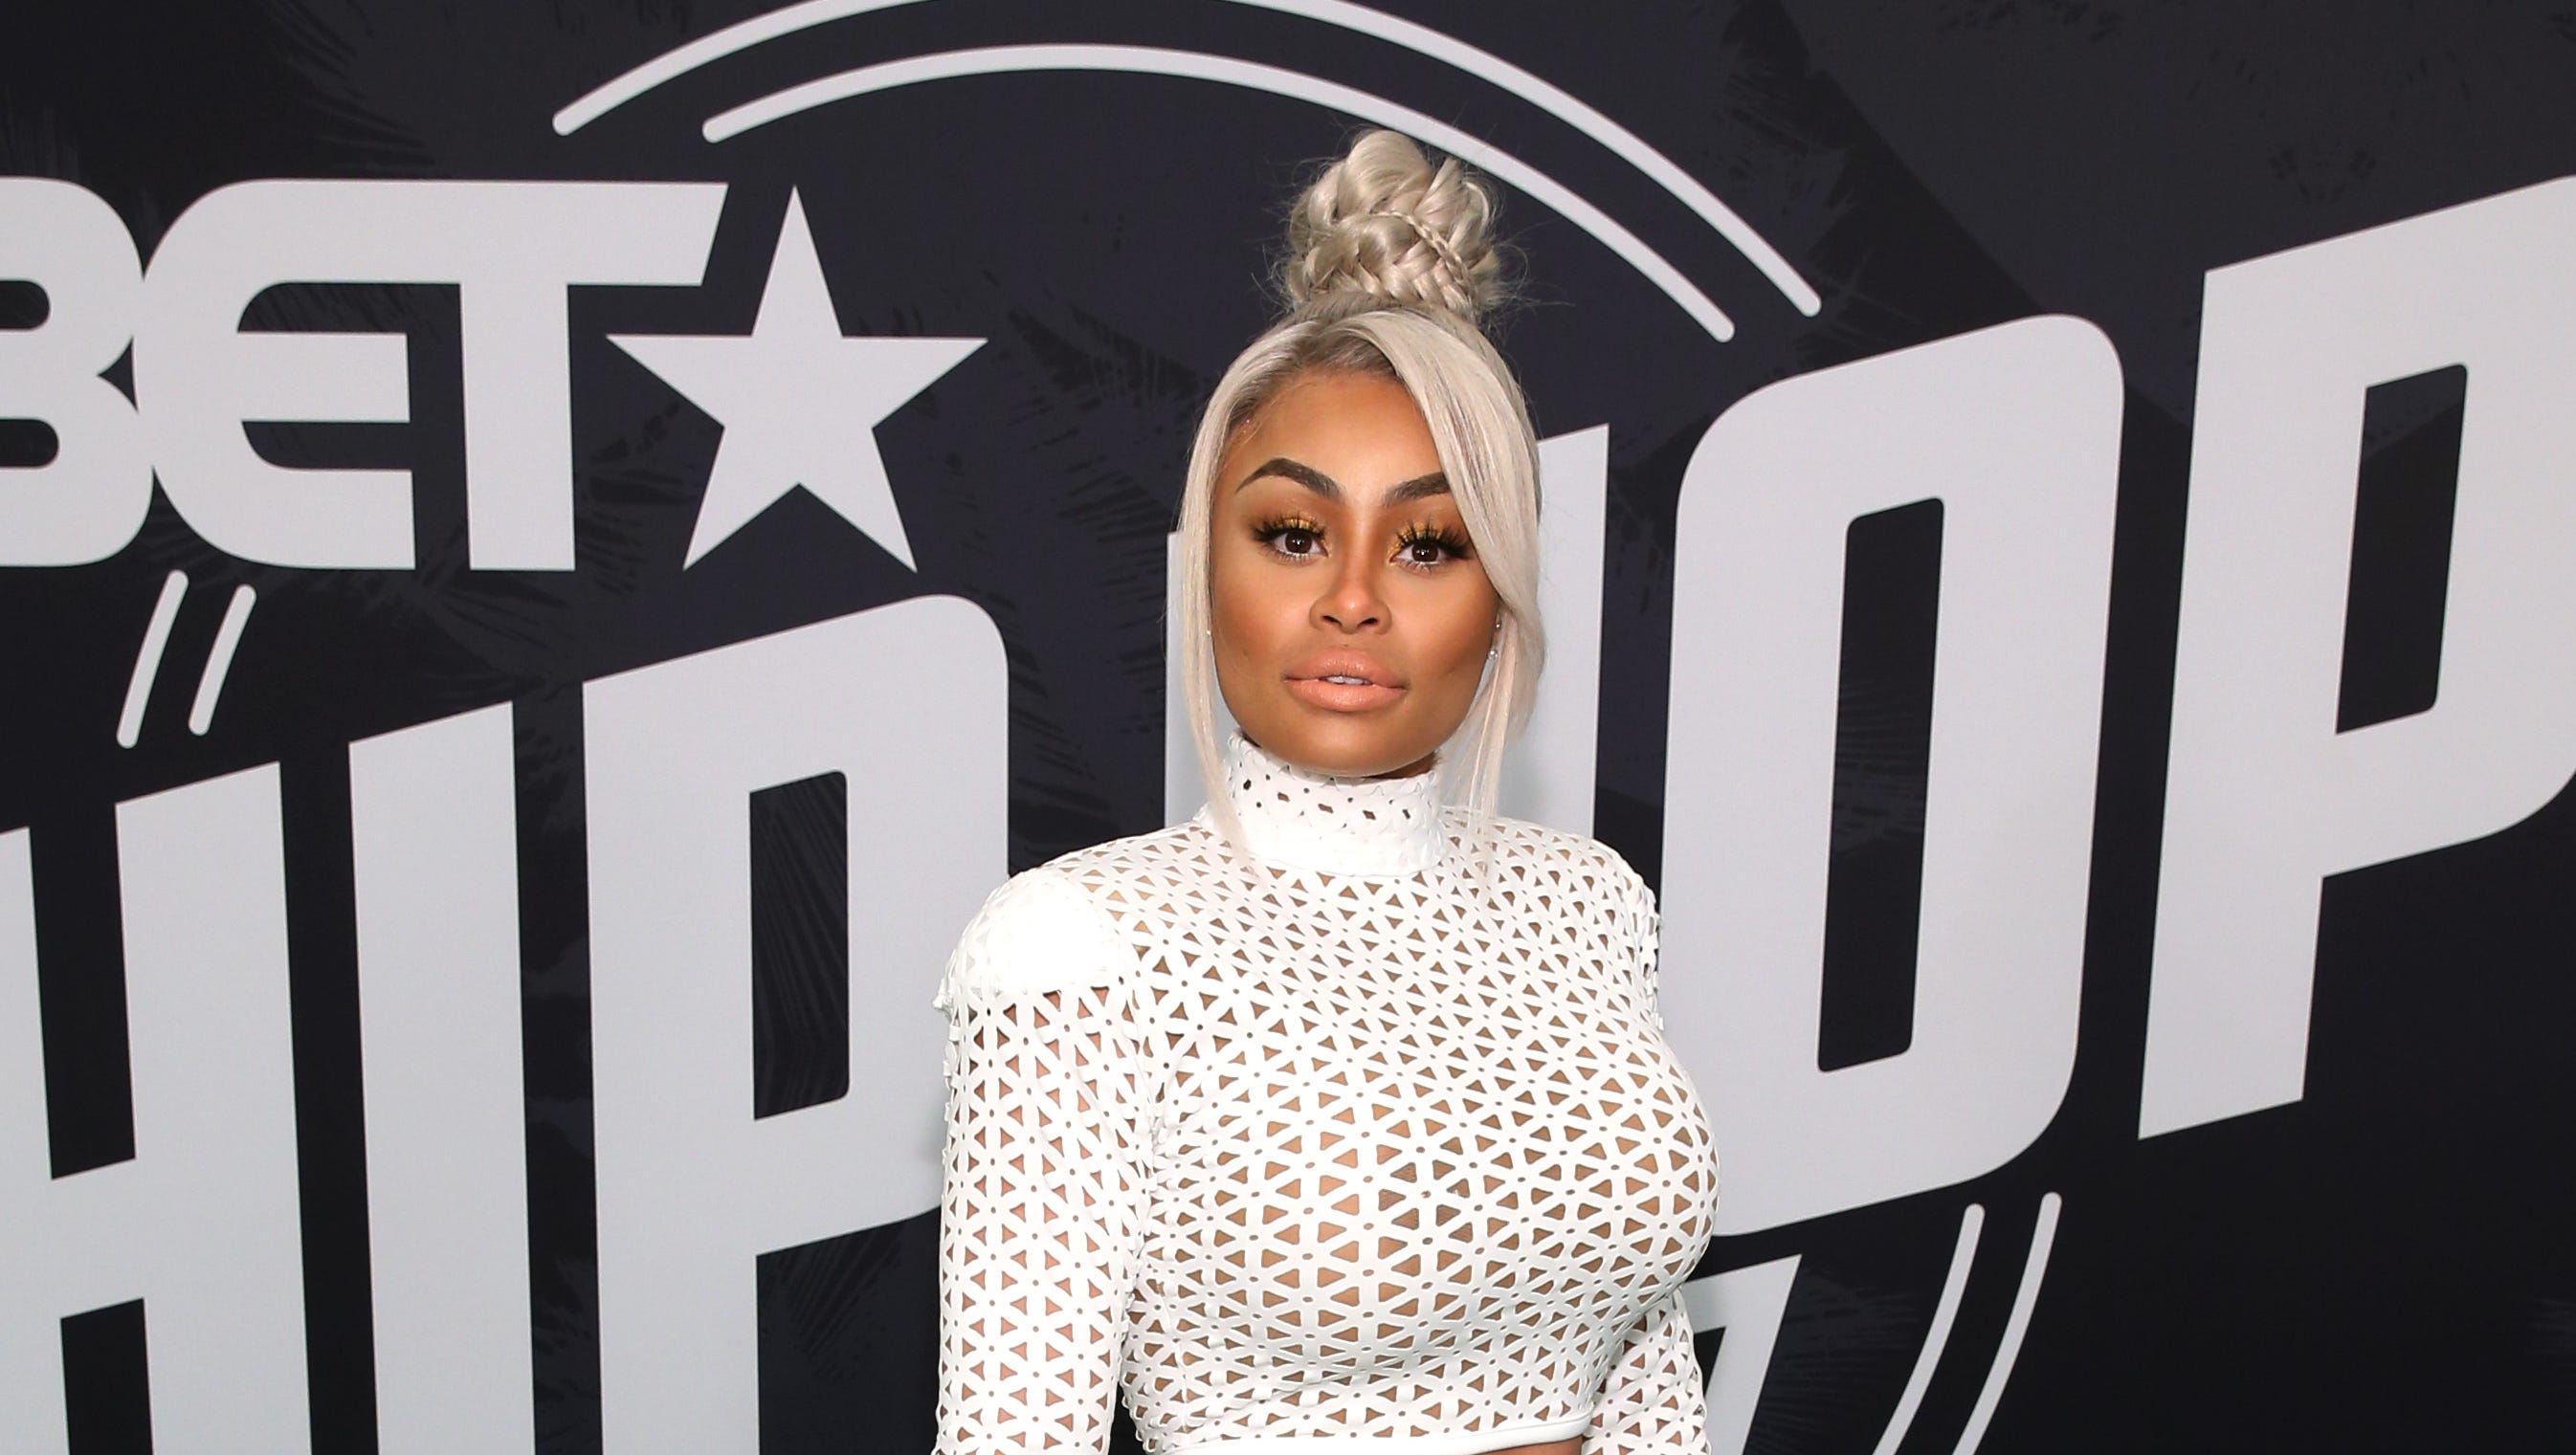 Rob And Blac Chyna Sex Pics - Blac Chyna will ask police to investigate leaked sex tape